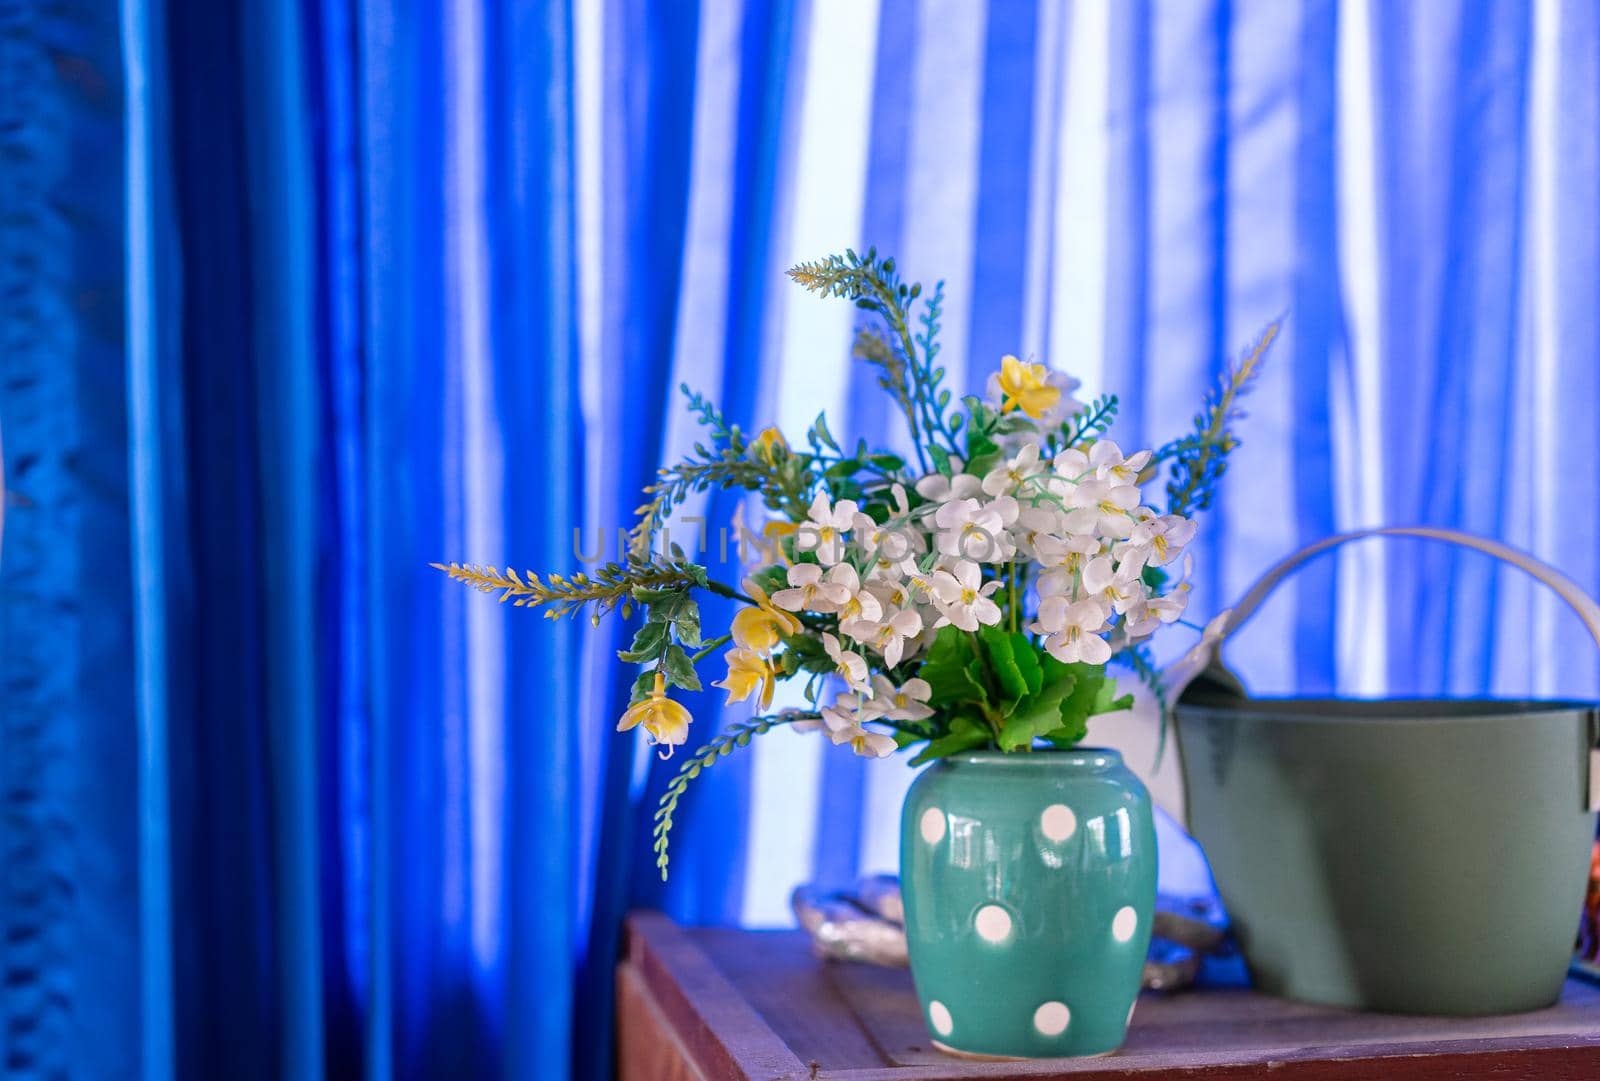 Fake flowers in a vase on wood table by domonite